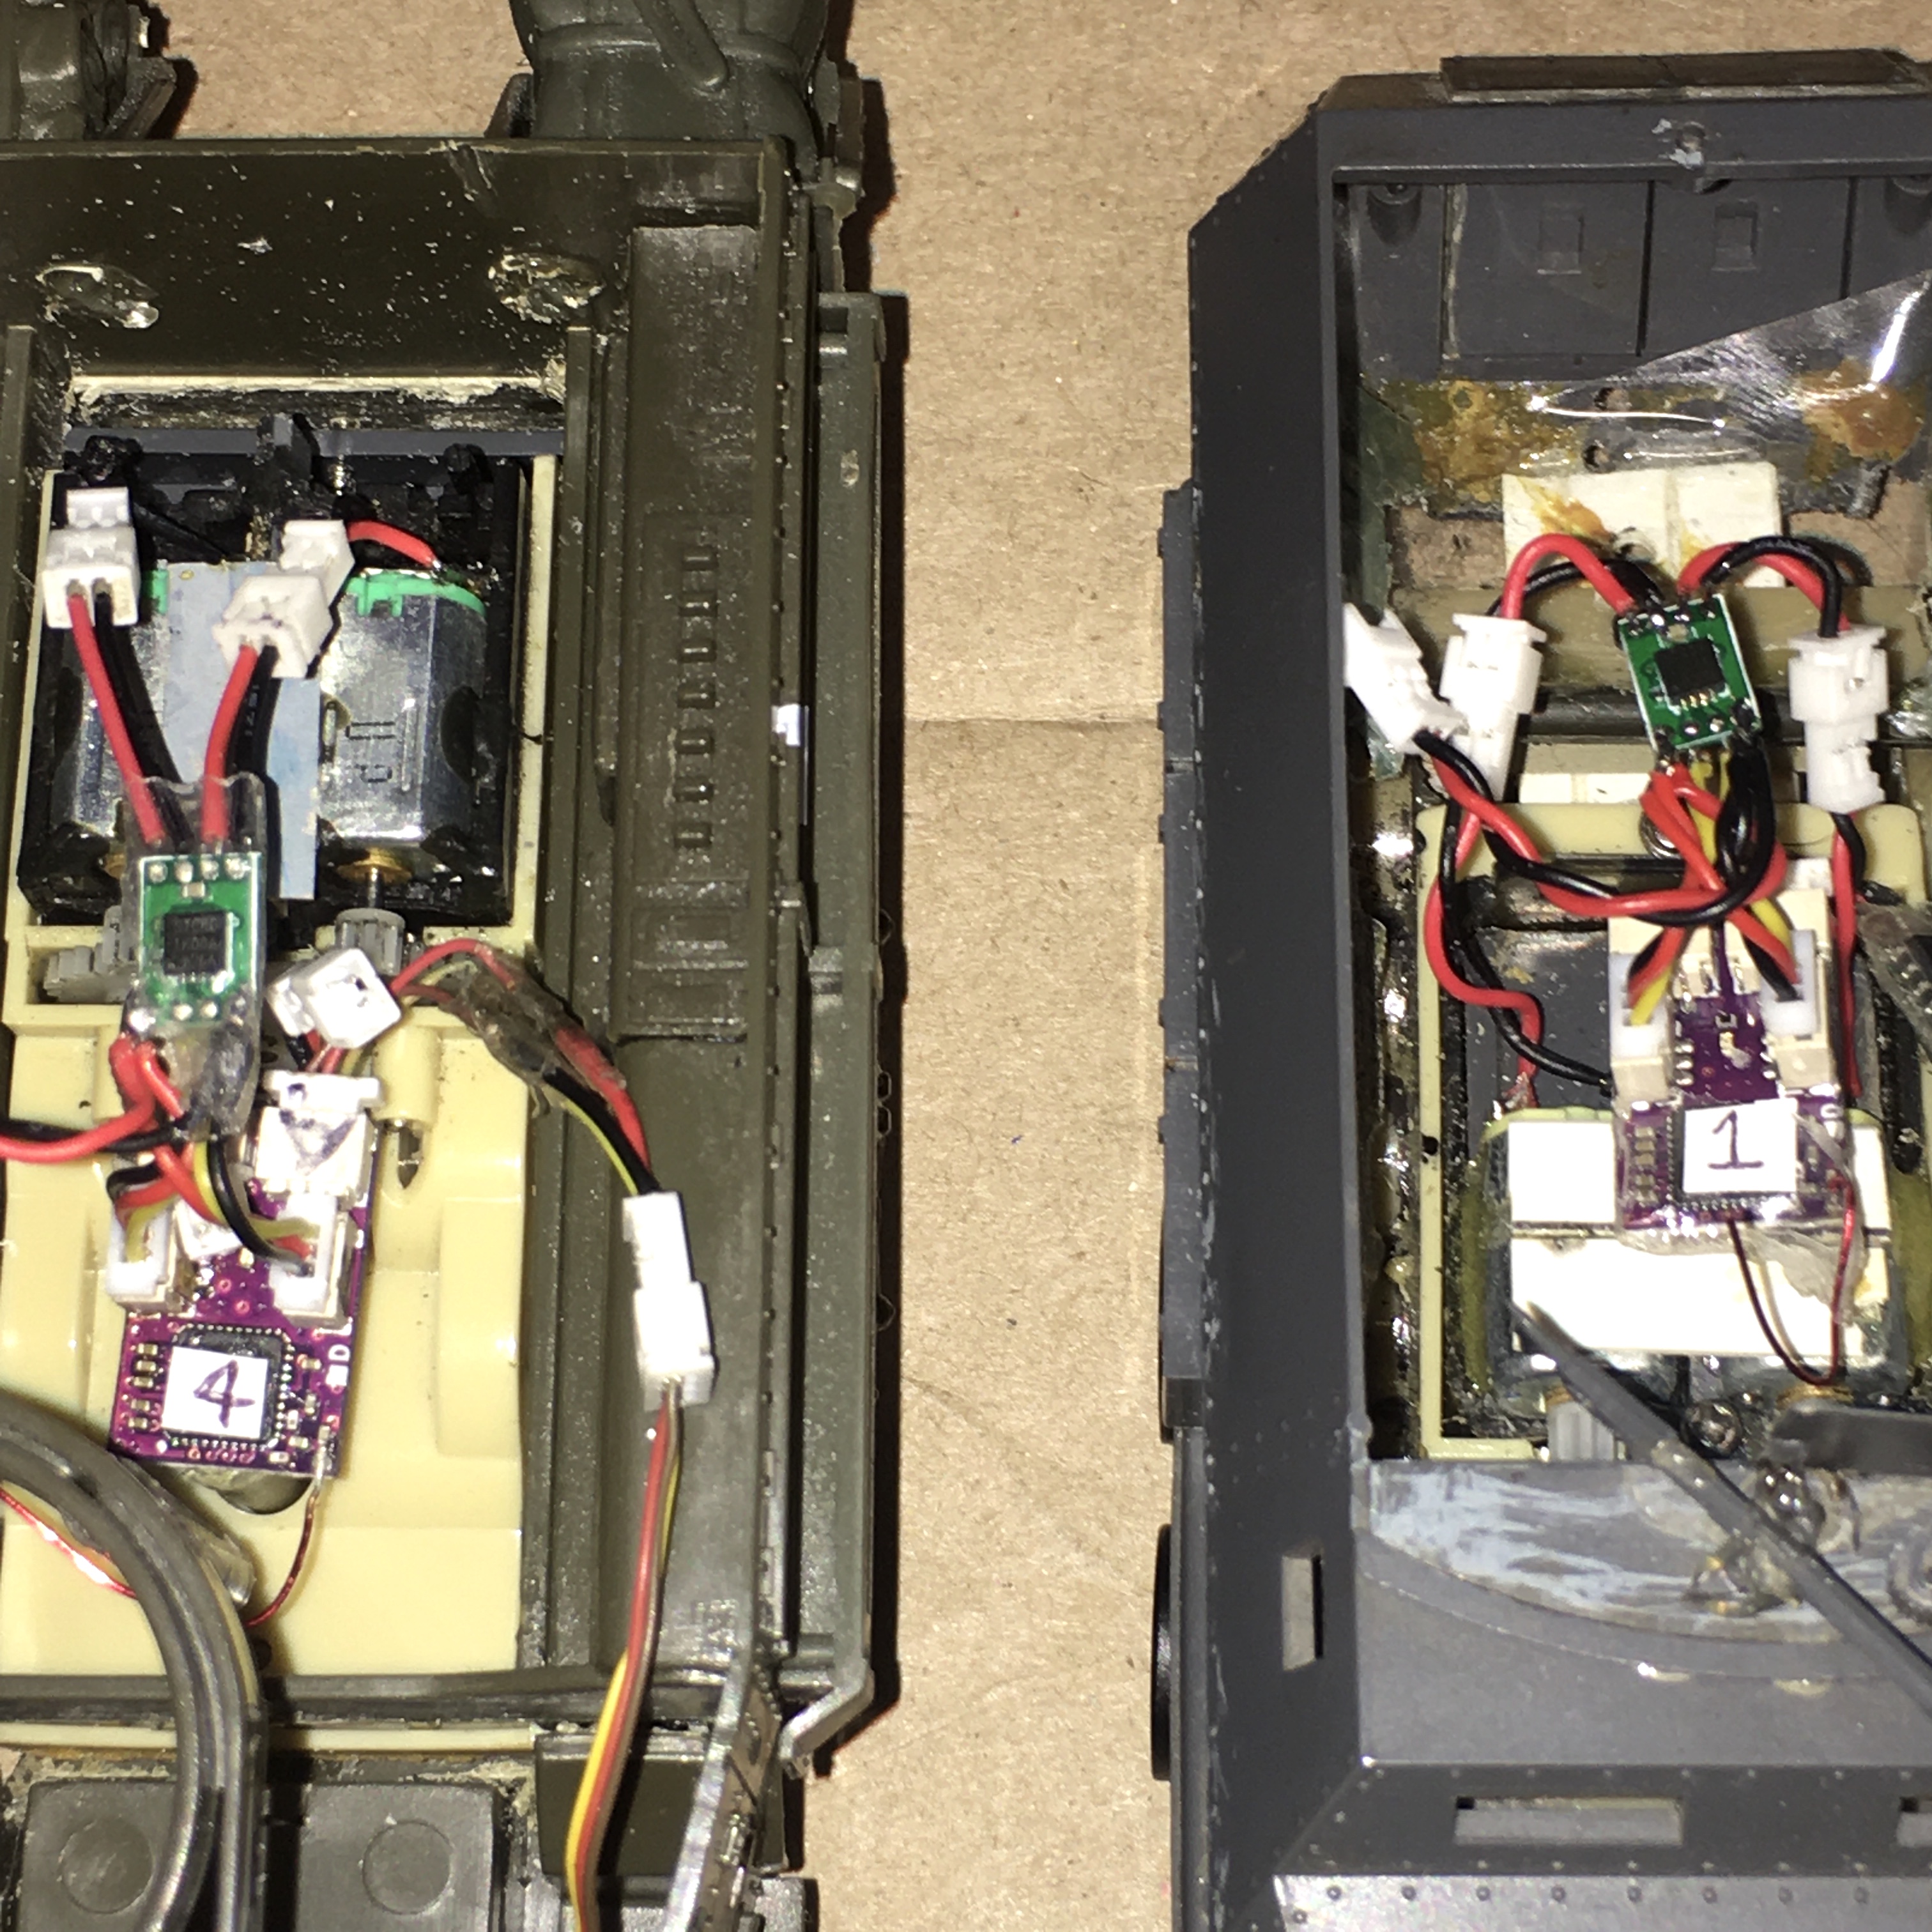 No.4 radio on the left, No.1 on the right. I have 6 of these radios  Ma-RX-42-D+(DSMX/2)  in operation so far and plan on upgrading all my best 1/35 with these receivers with Telemetry.